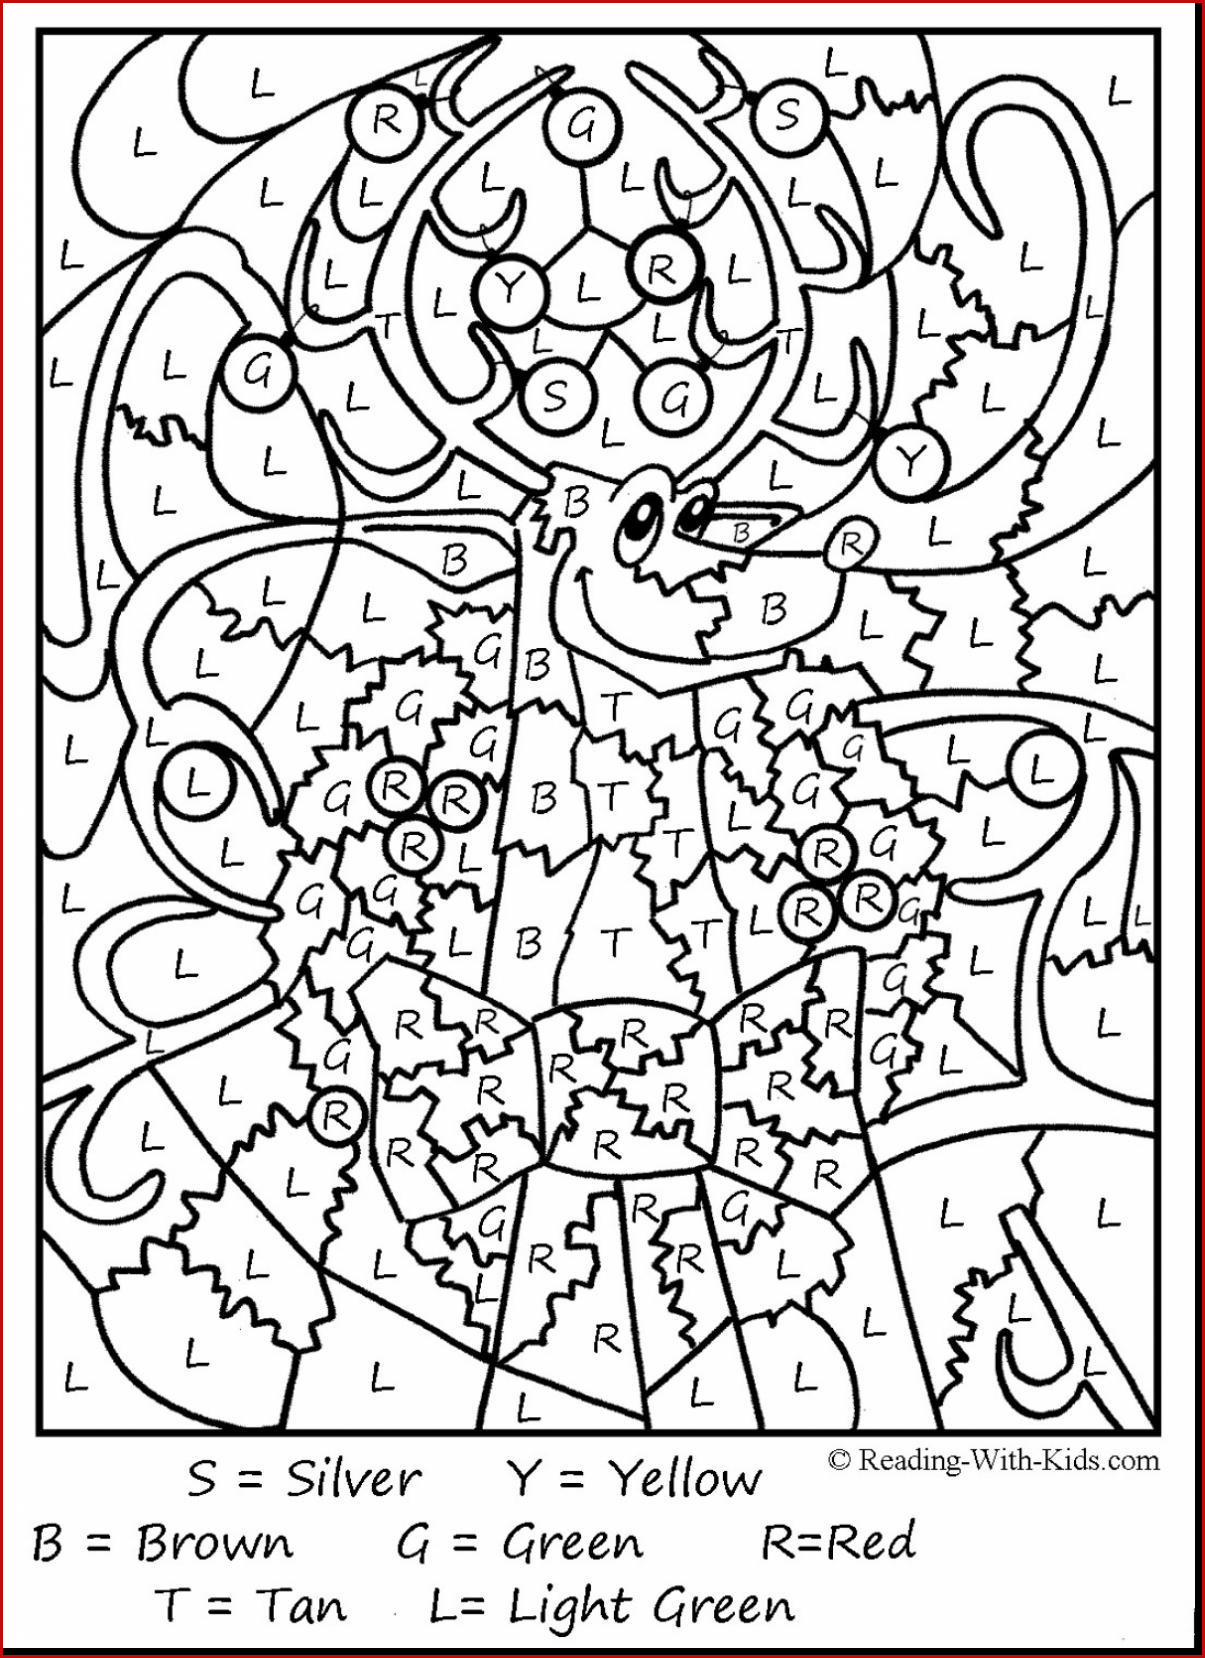 Coloring Pages for 3rd Graders Math Coloring Pages Tag Free Math Coloring Worksheets